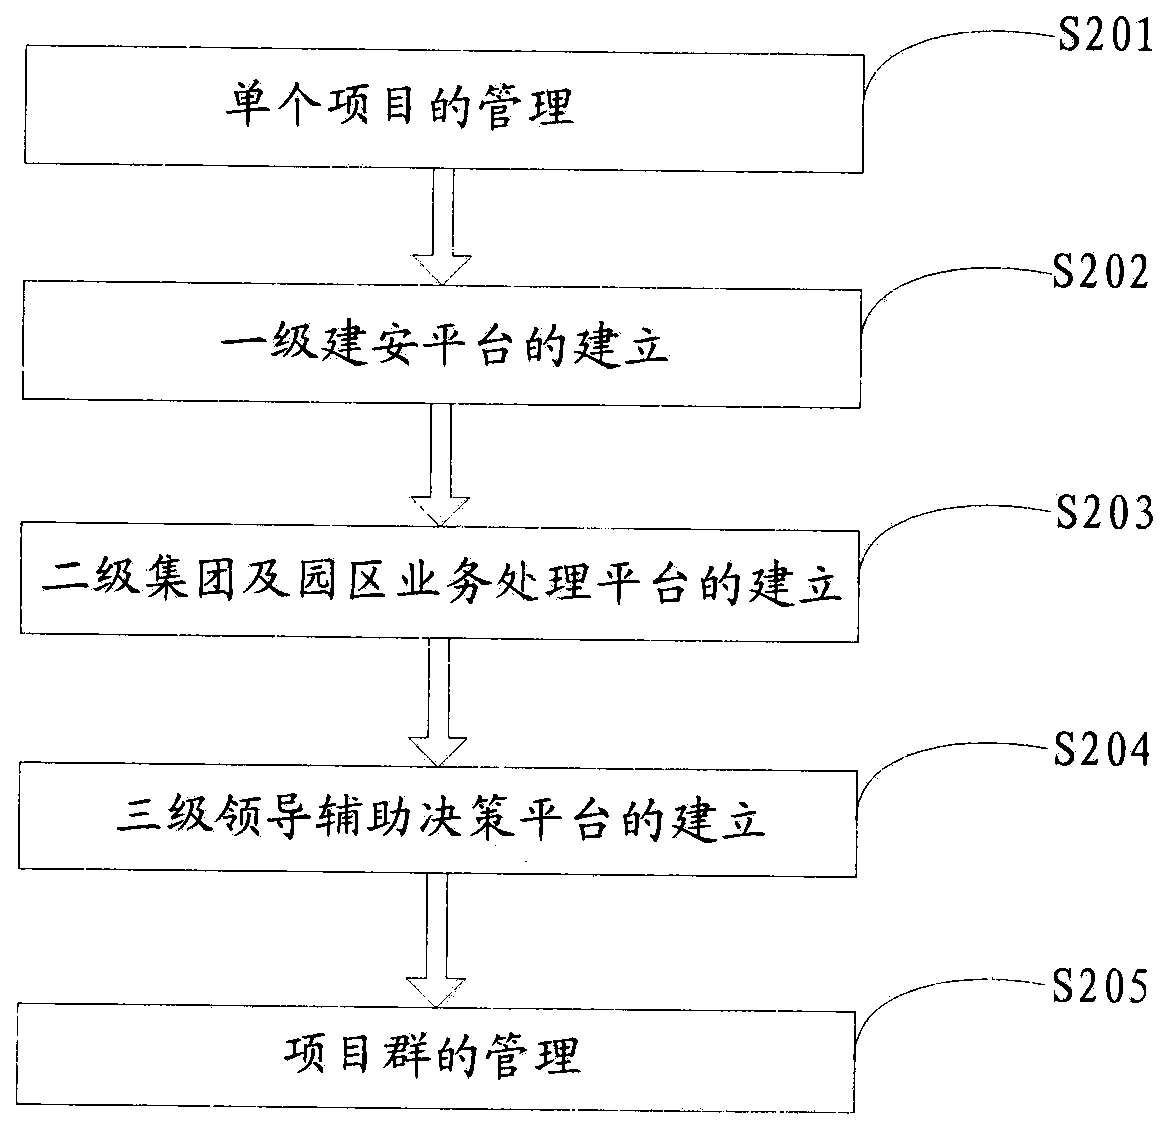 Development area construction project management system and method